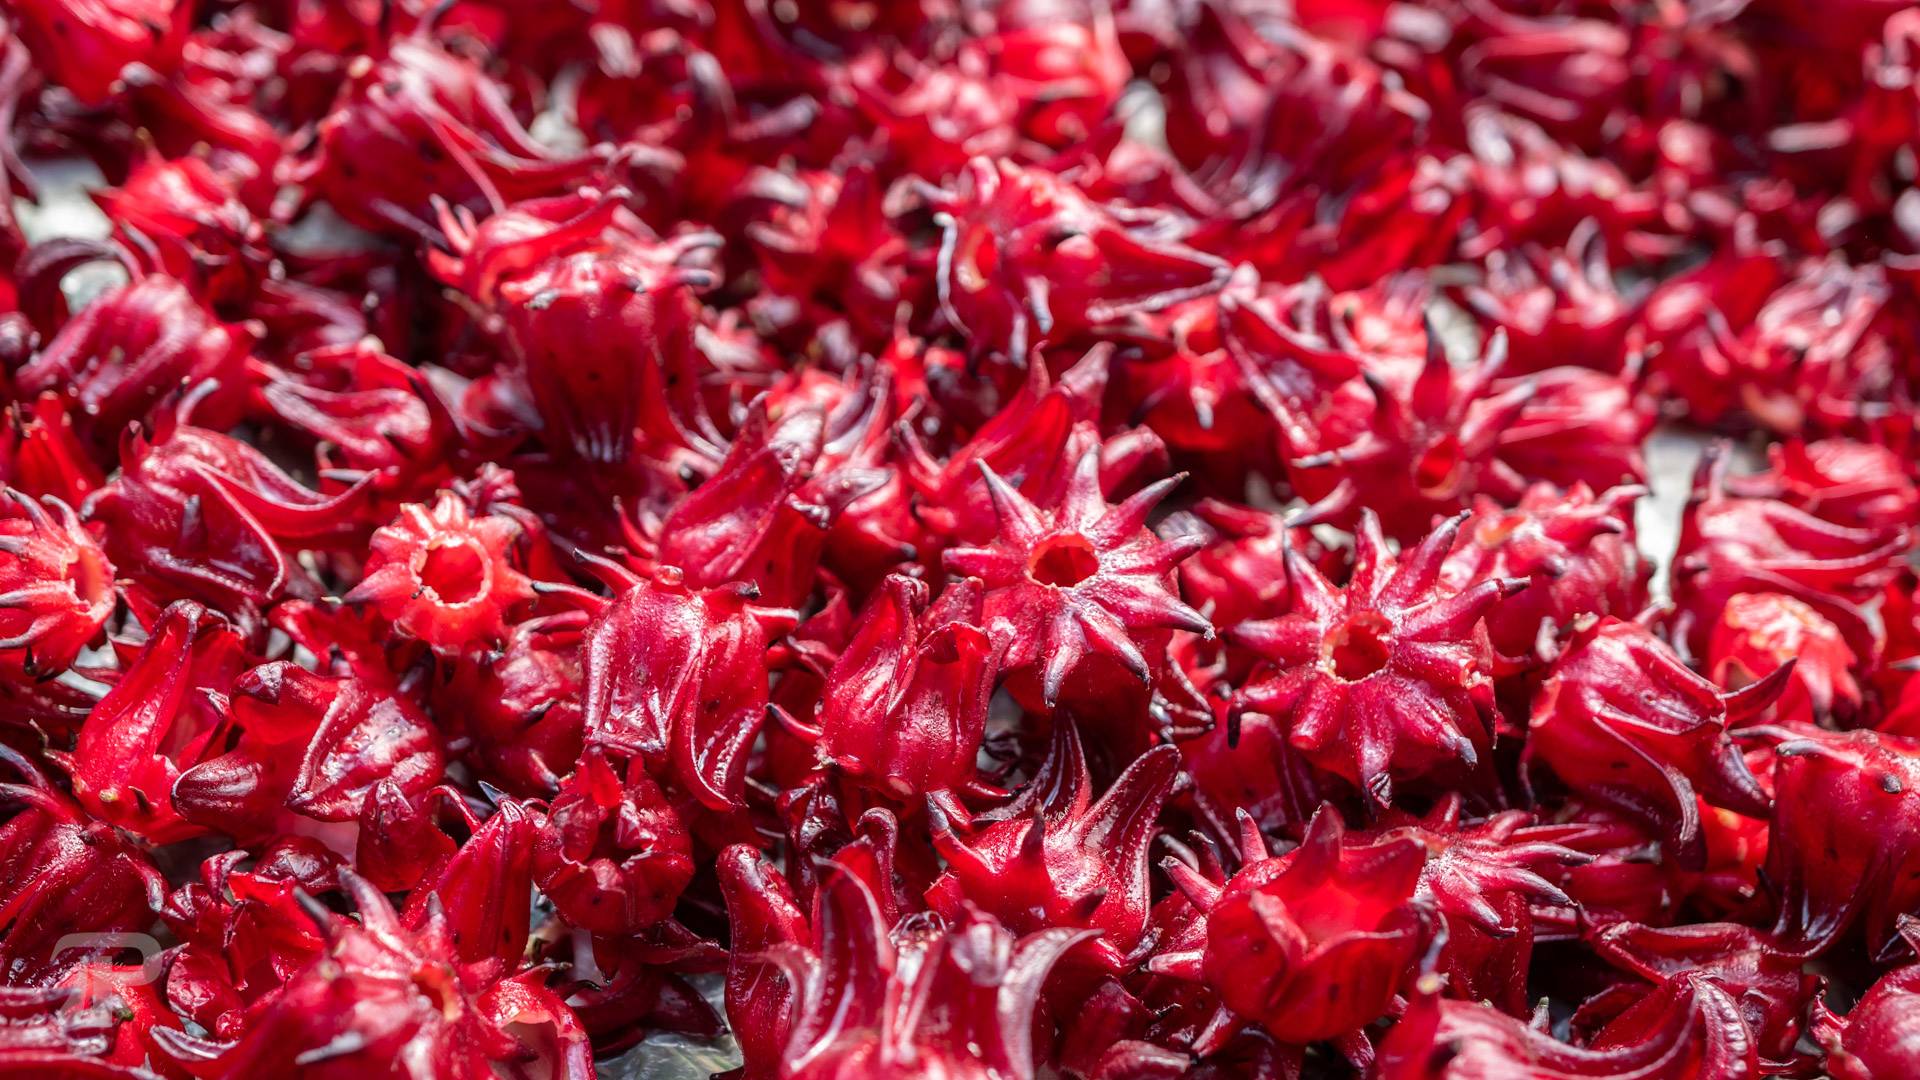 Roselle being dried up under the sun